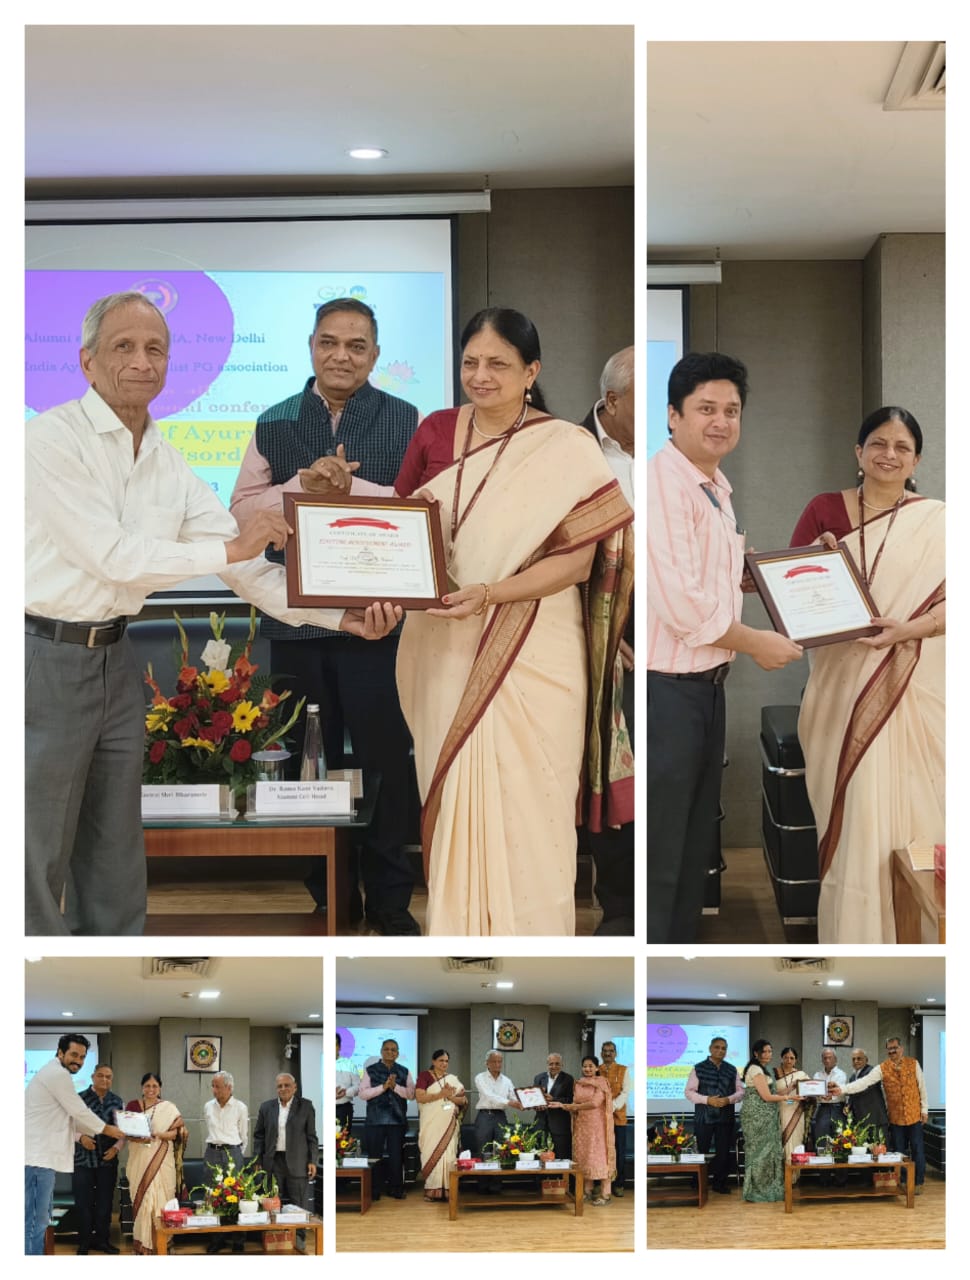 Celebrating 8th AyurvedaDay, Prof.(Dr) Tanuja Nesari, Director AIIA was awarded Life Time Achievement Award by AIASPGA (All India Ayurveda Specialist PG Association) for her contribution to Ayurveda.